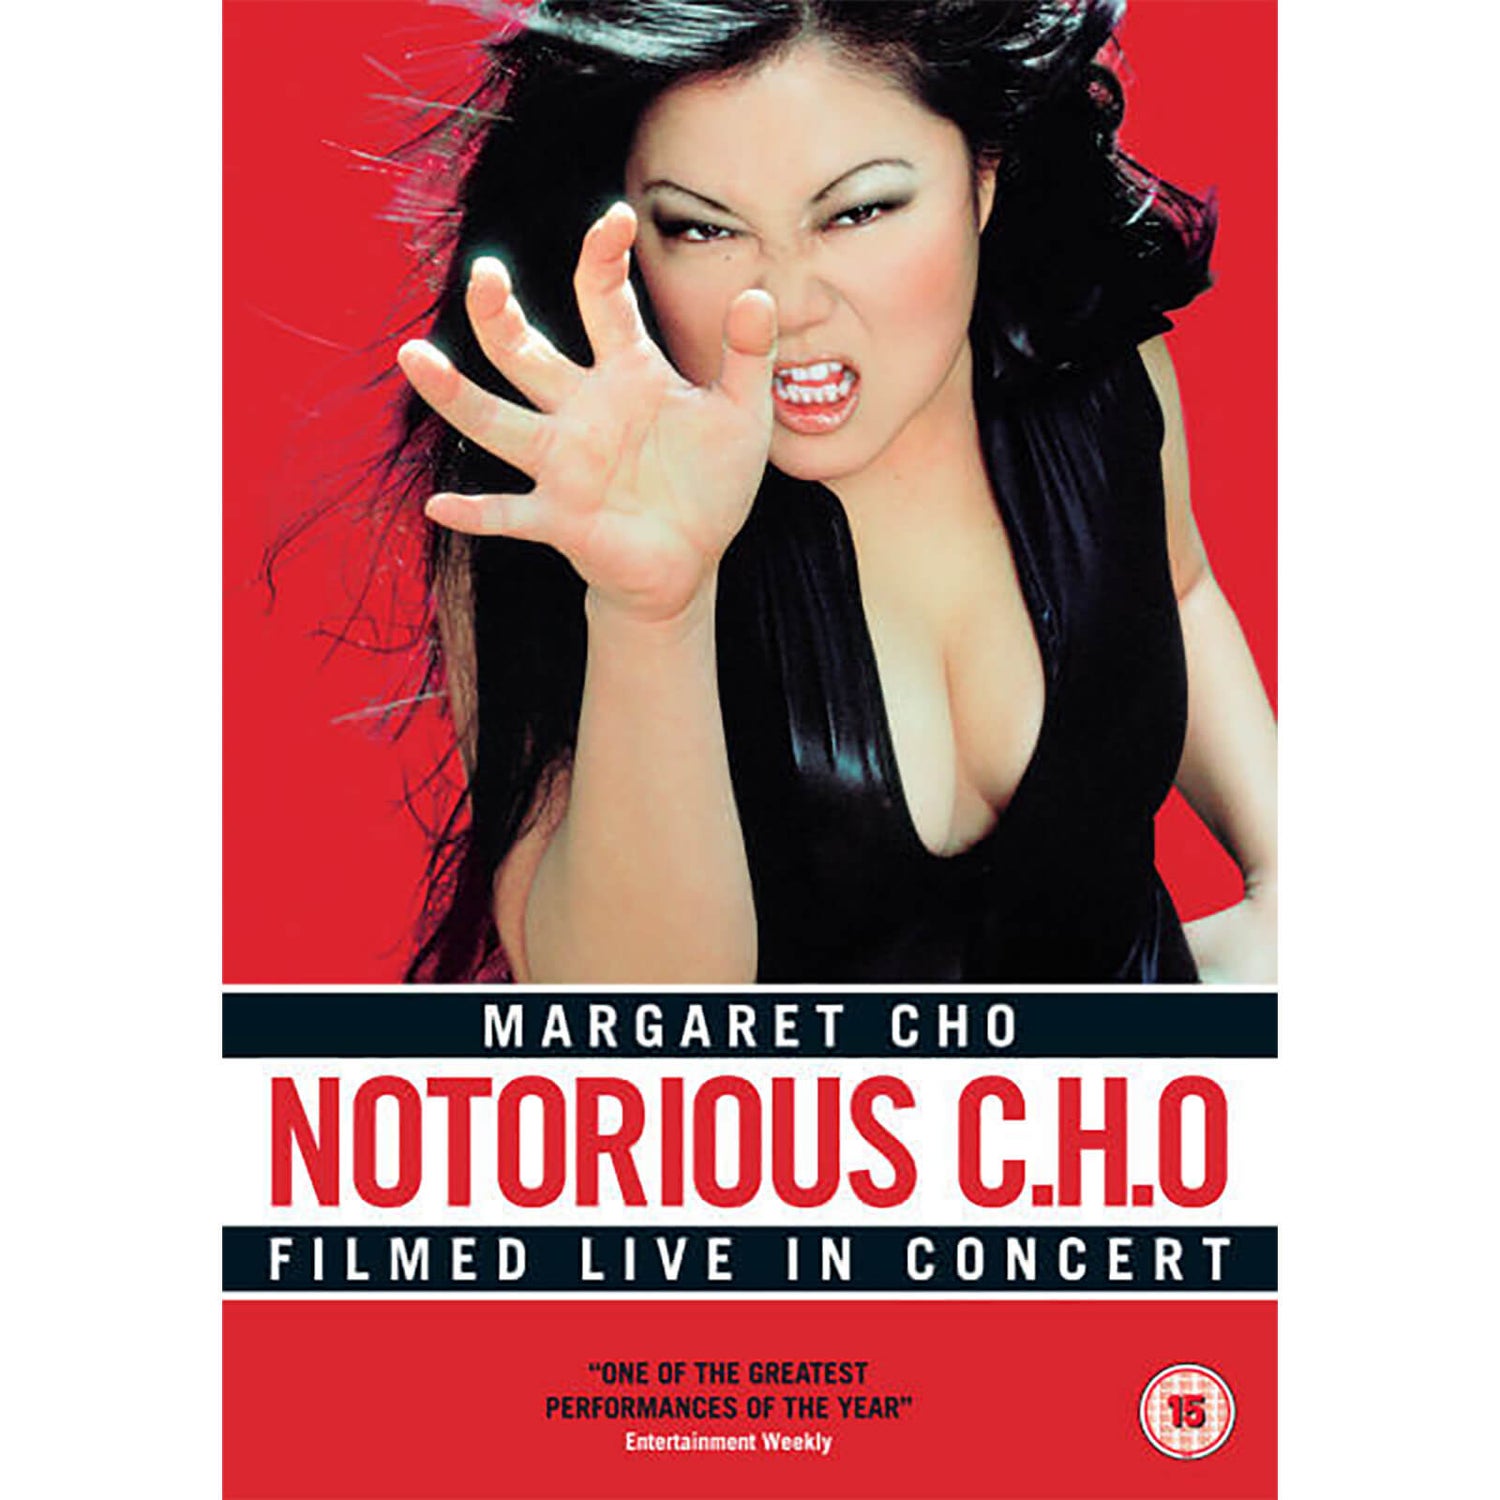 Notorious C.H.O (Margaret Cho)